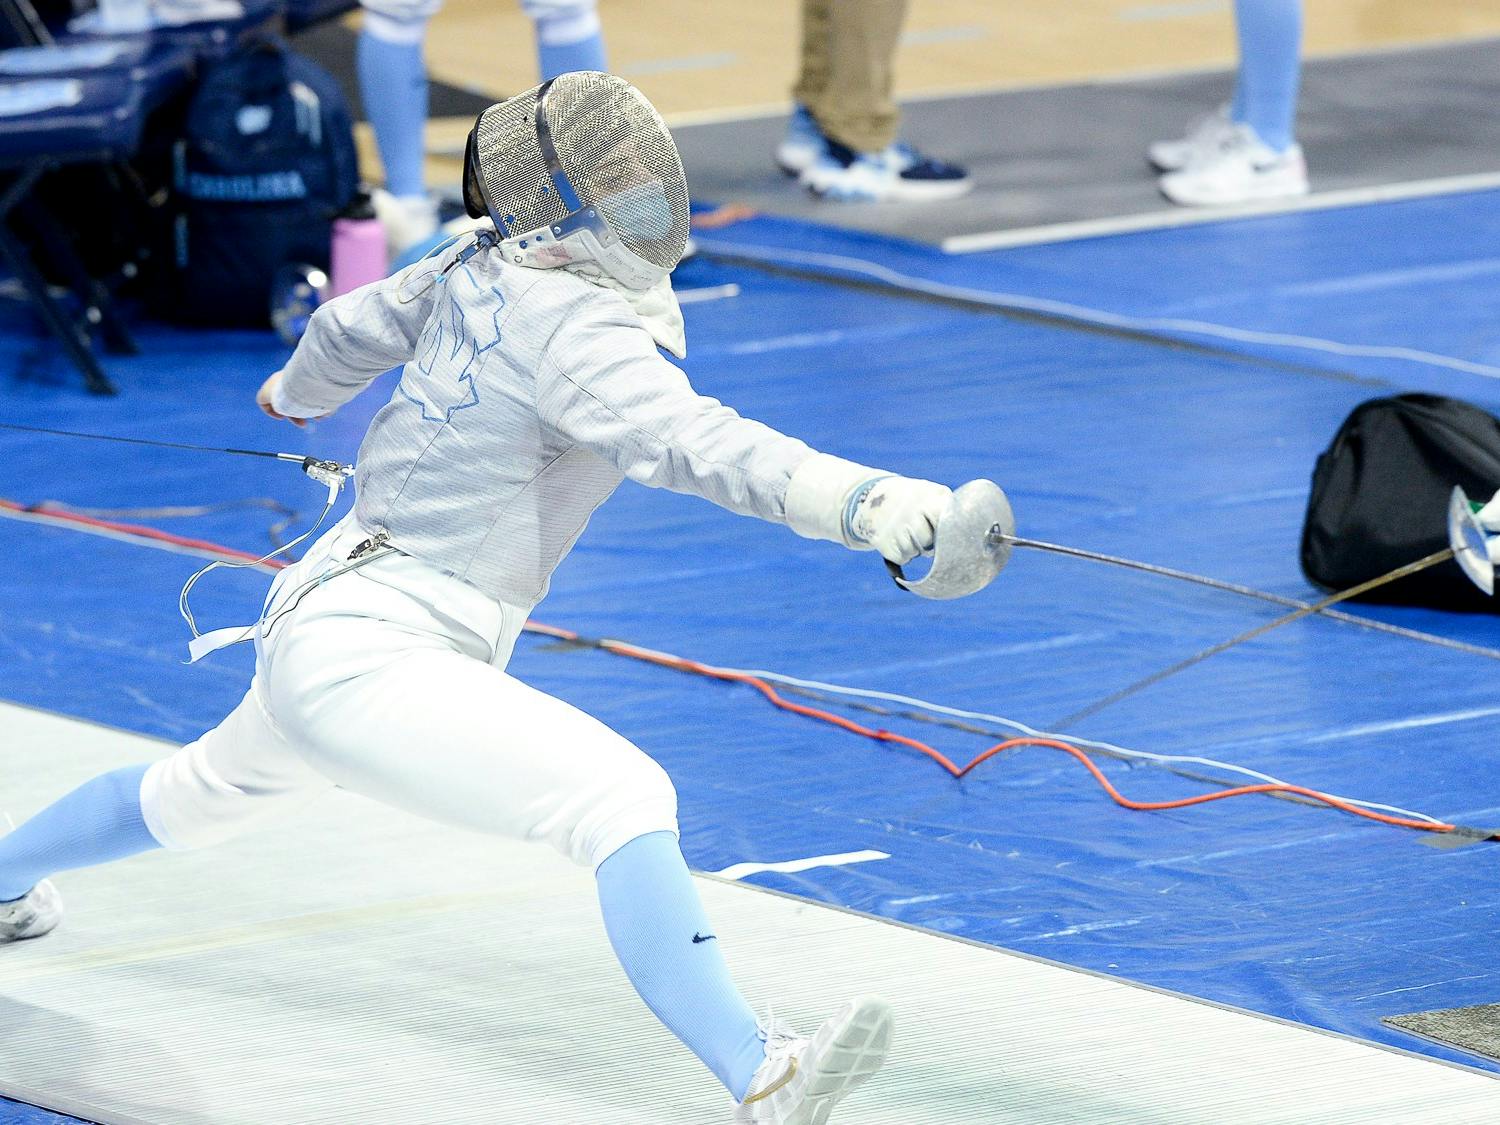 Abigale Parker fences during the  ACC Championship in Carmichael Arena on Sunday, Feb. 28, 2021.
Photo Courtesy of Jeffrey Camarati/UNC Women's Fencing.